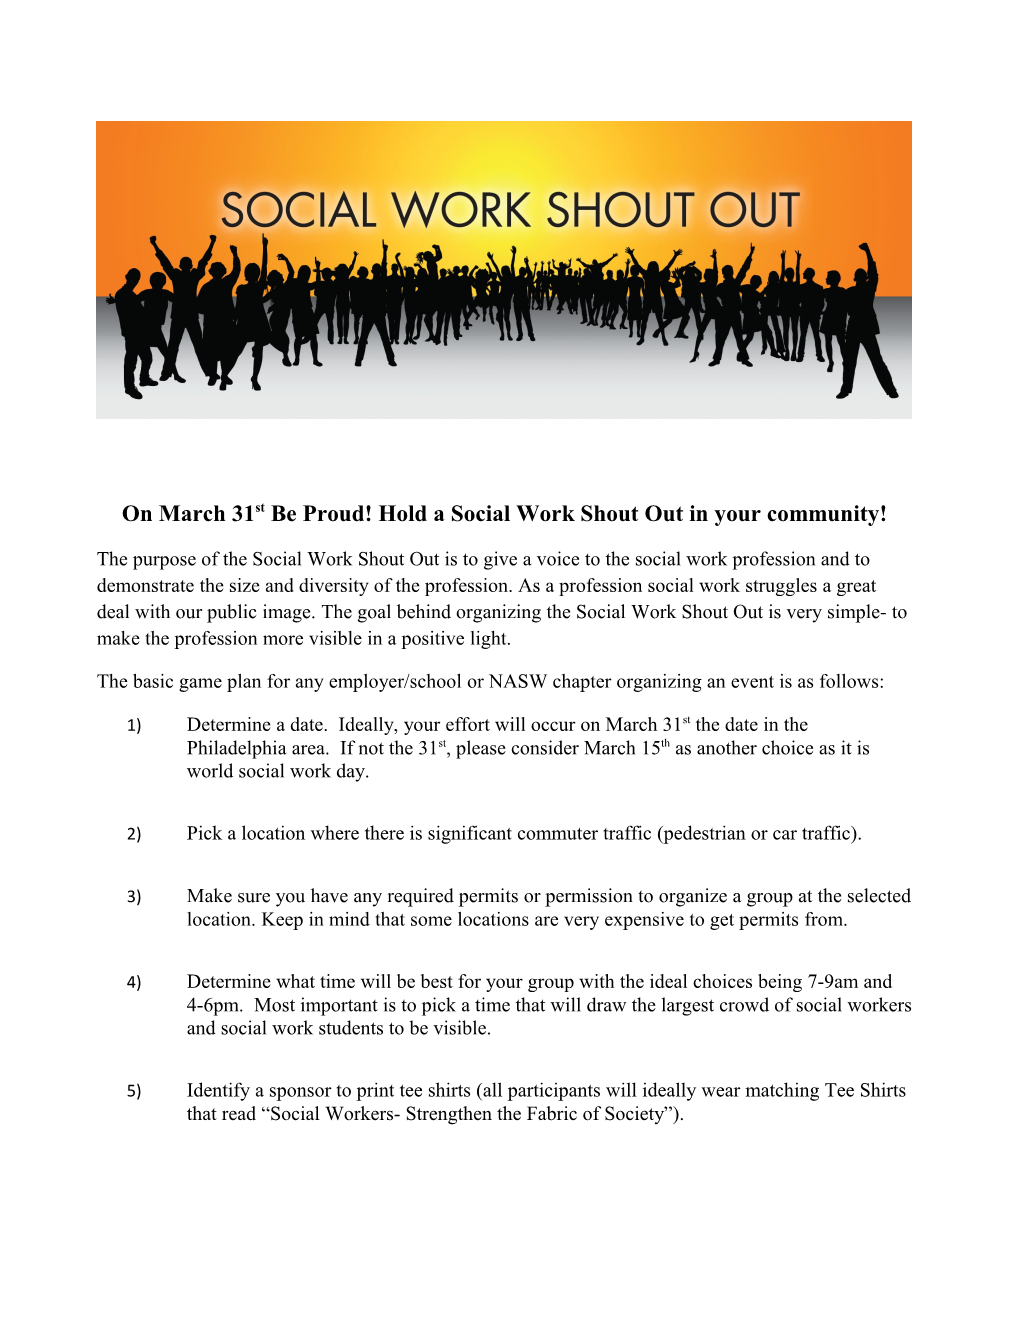 On March 31St Be Proud! Hold a Social Work Shout out in Your Community!